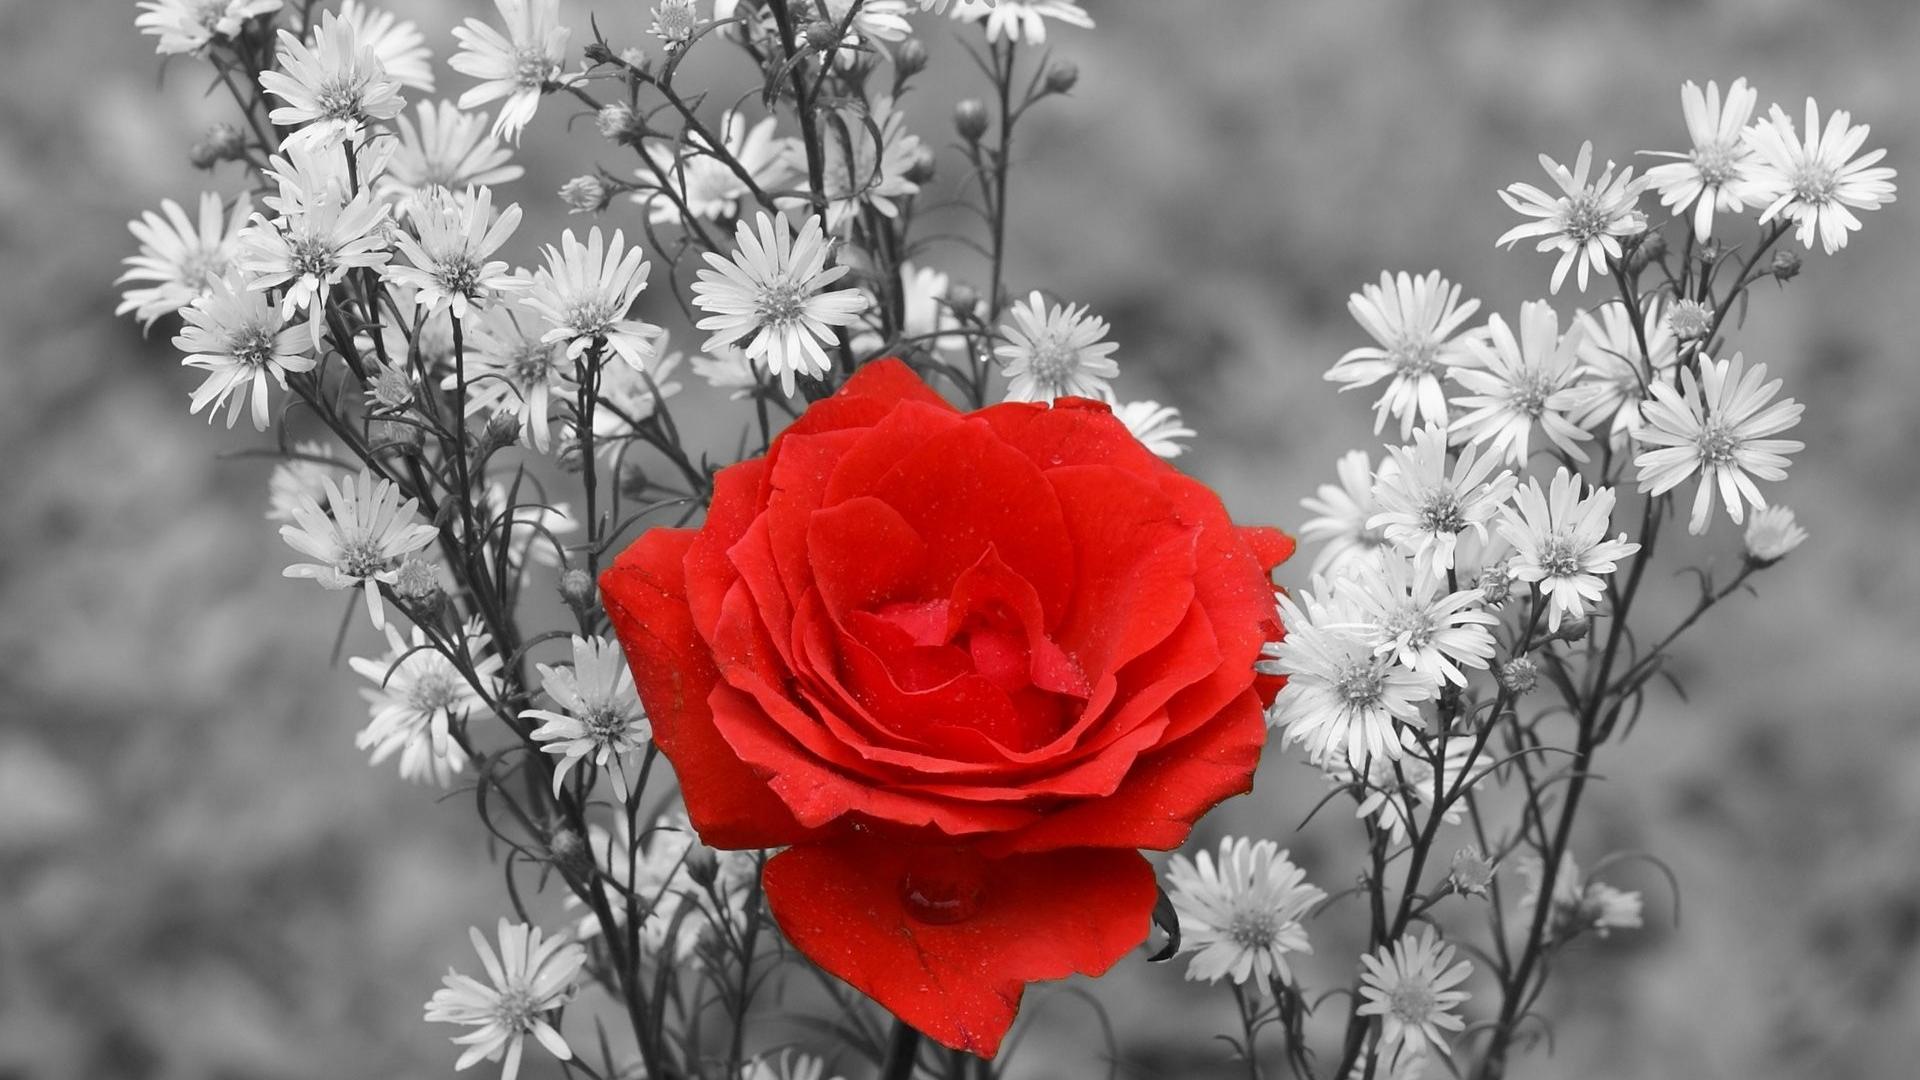 Black And White Red Rose Wallpaper